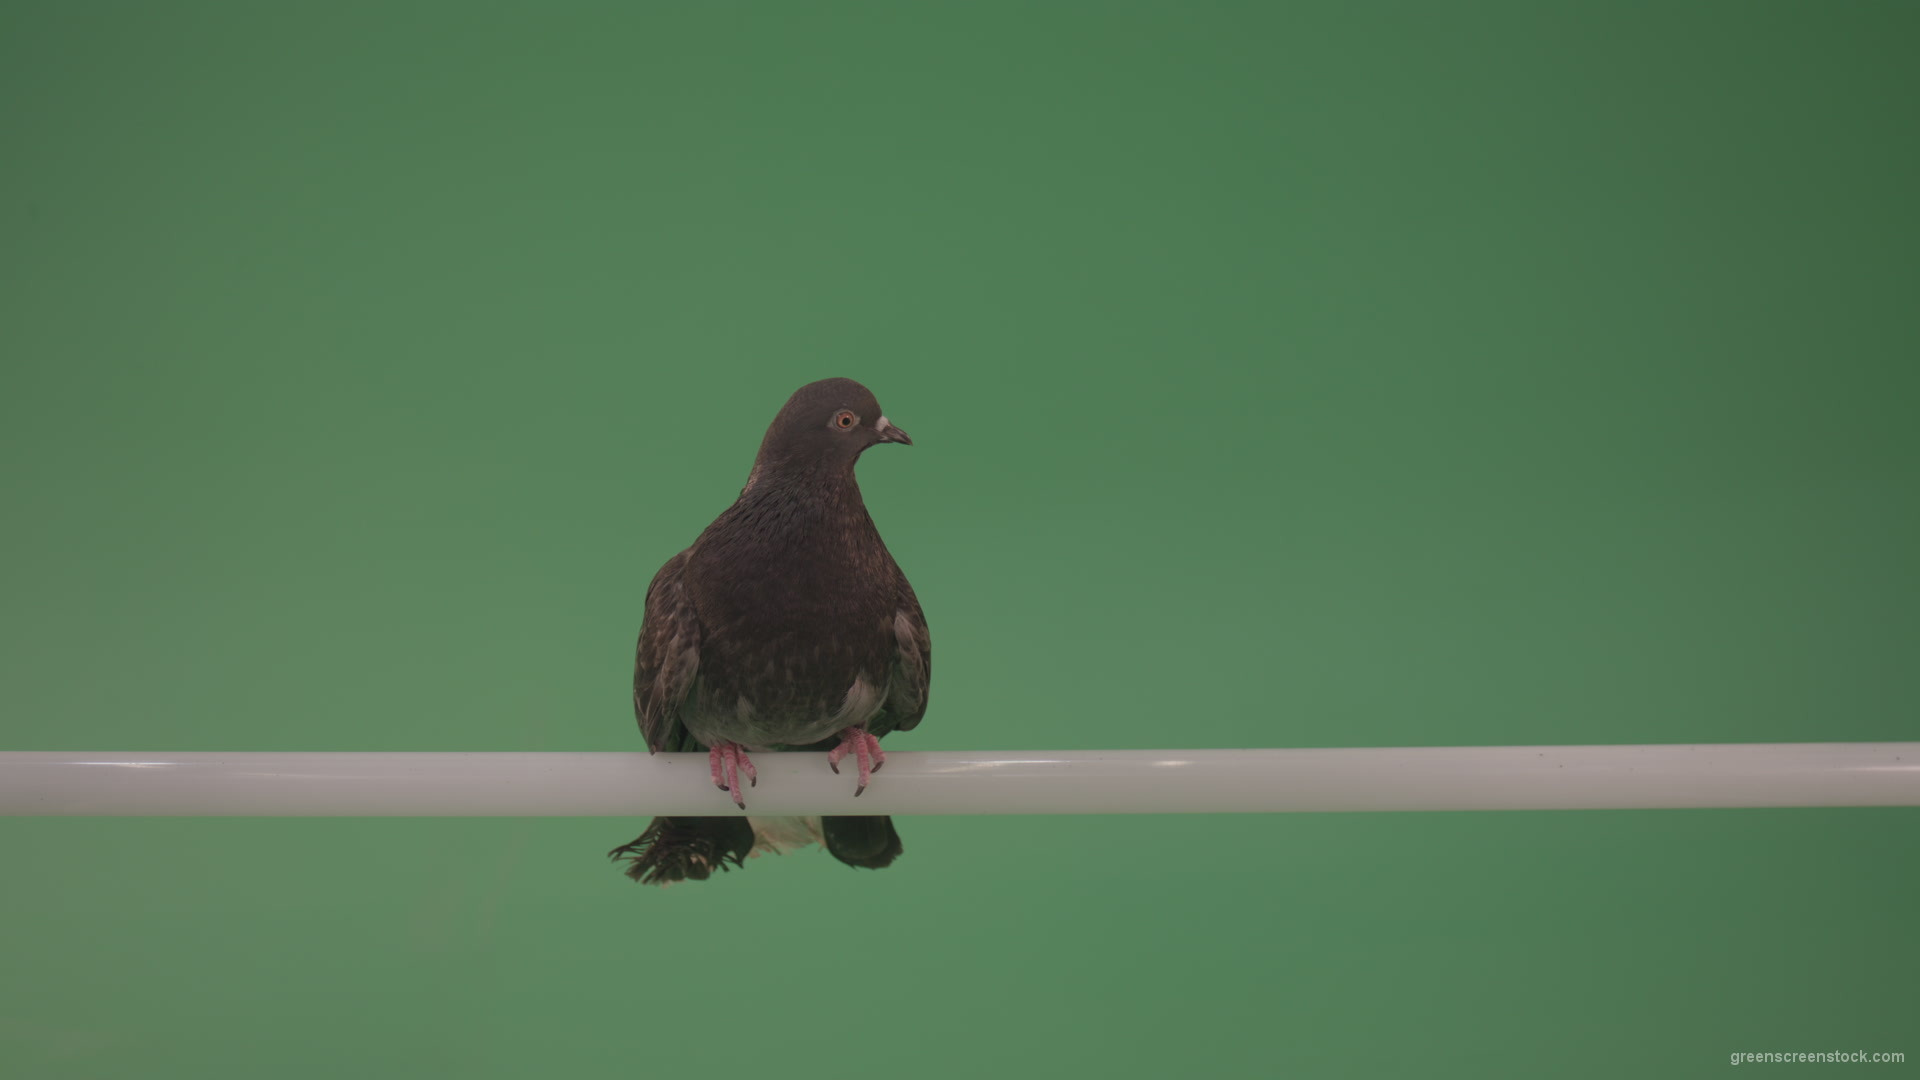 City-bird-of-a-dove-sitting-on-a-branch-in-the-city-isolated-on-green-background_006 Green Screen Stock